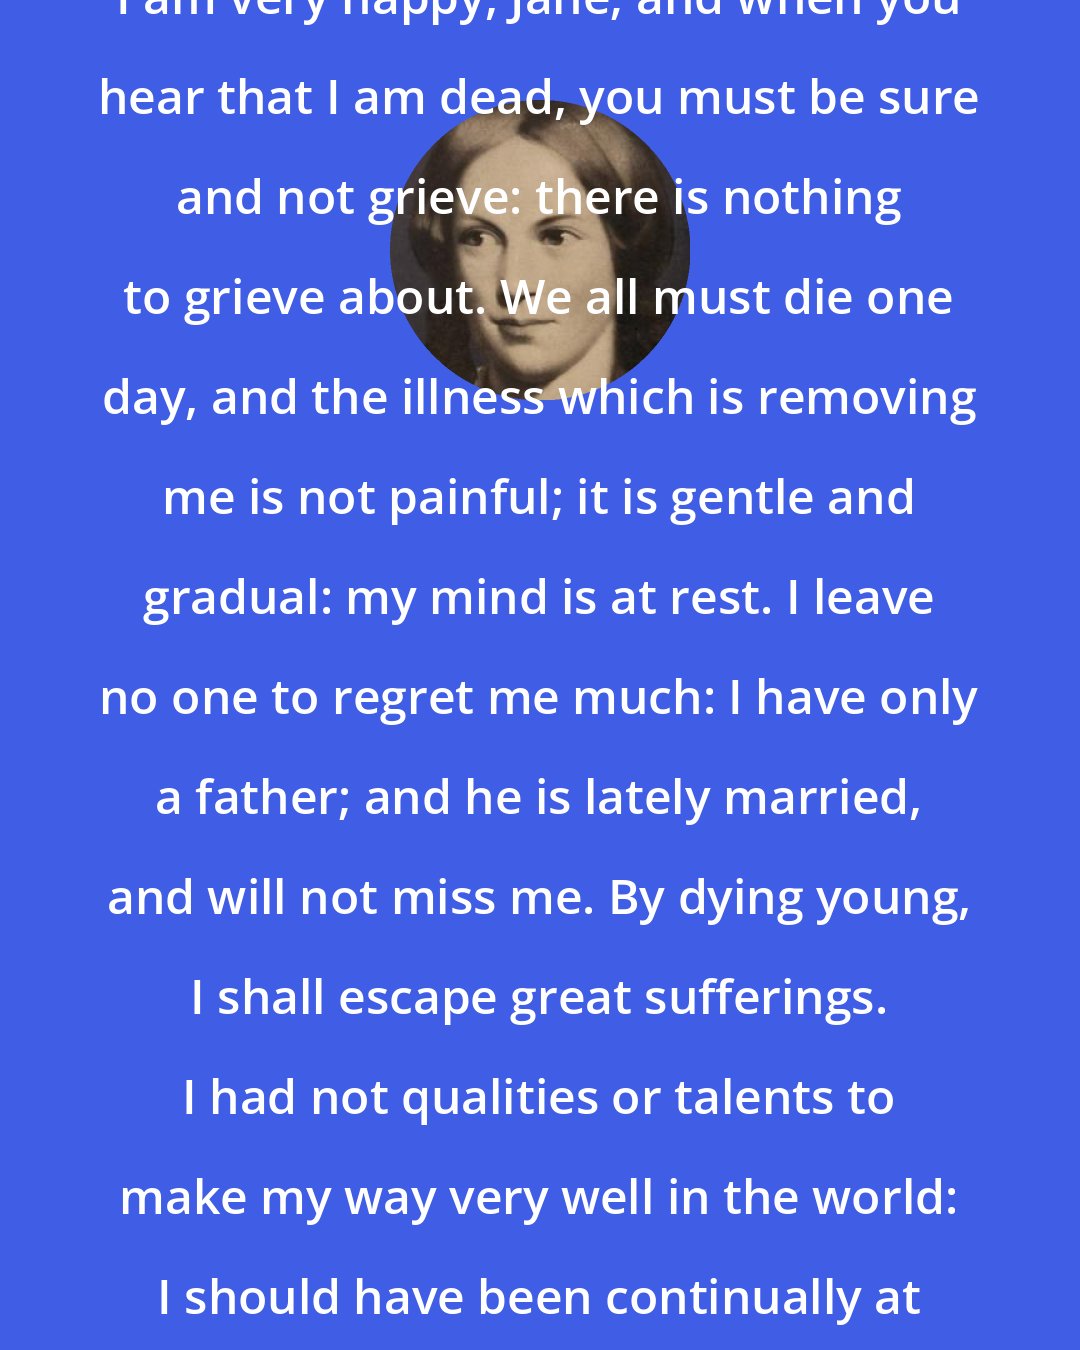 Charlotte Bronte: I am very happy, Jane; and when you hear that I am dead, you must be sure and not grieve: there is nothing to grieve about. We all must die one day, and the illness which is removing me is not painful; it is gentle and gradual: my mind is at rest. I leave no one to regret me much: I have only a father; and he is lately married, and will not miss me. By dying young, I shall escape great sufferings. I had not qualities or talents to make my way very well in the world: I should have been continually at fault.